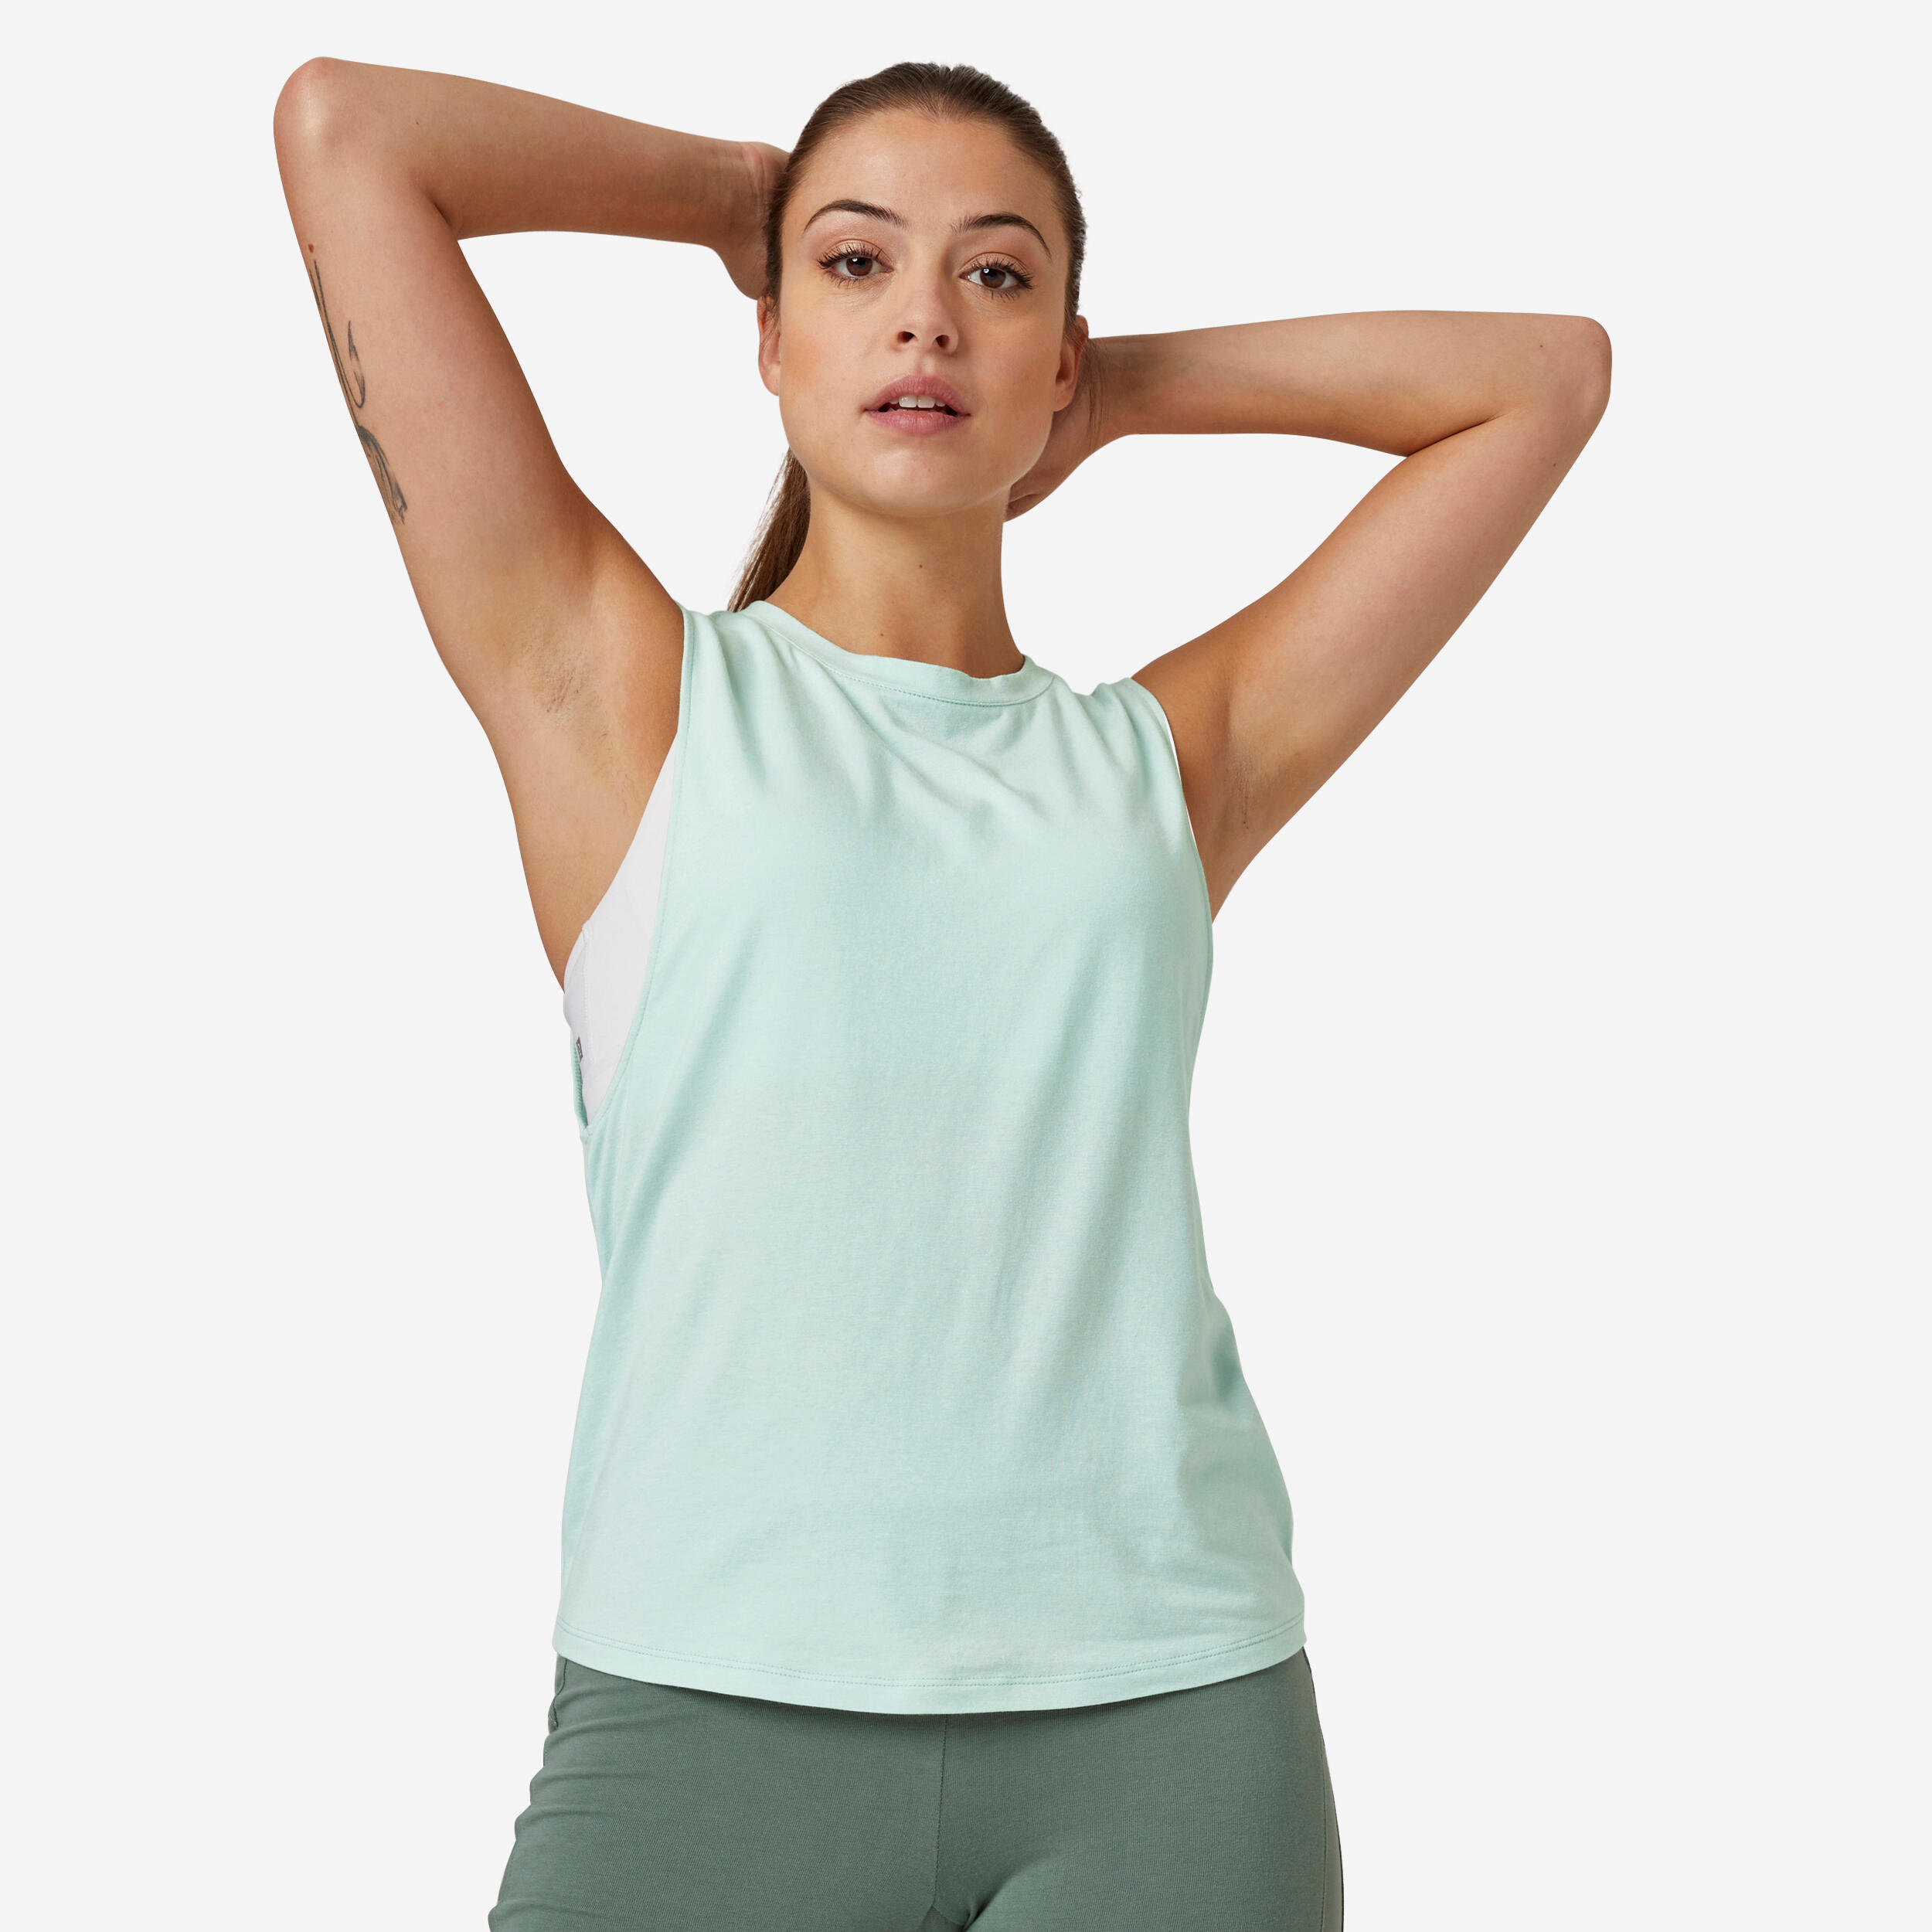 DOMYOS Women's Loose-Fit Fitness Tank Top 500 - Green